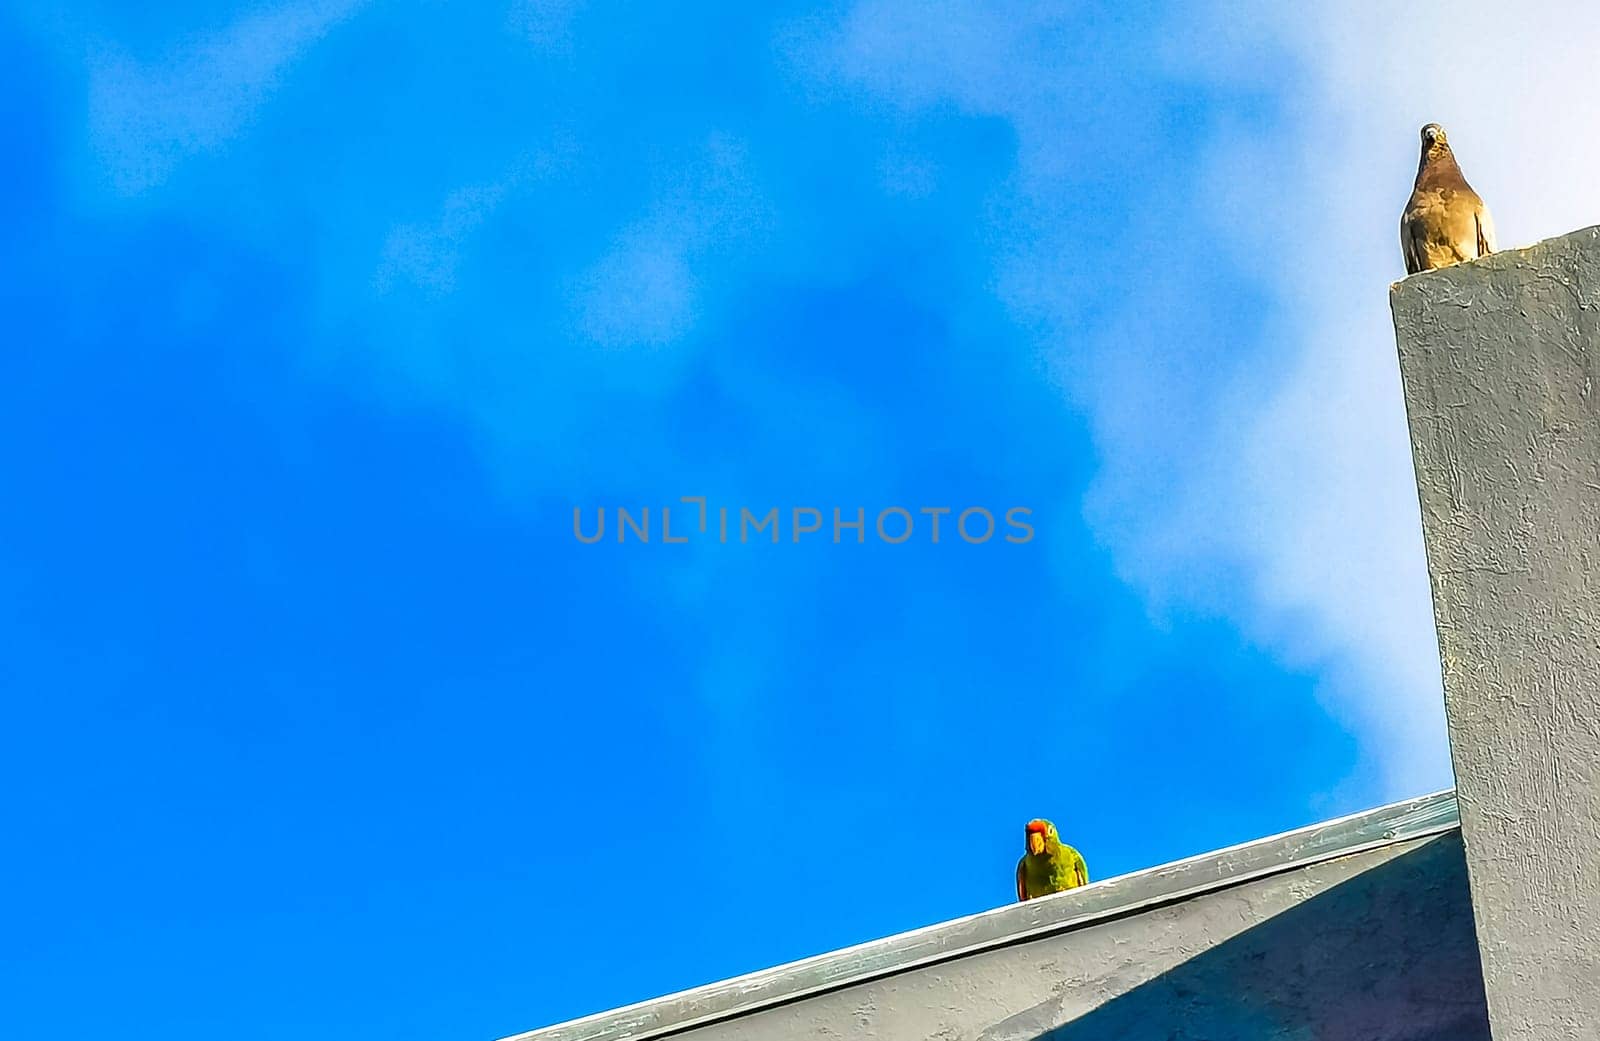 Green parrot and pigeon birds on roof Alajuela Costa Rica. by Arkadij